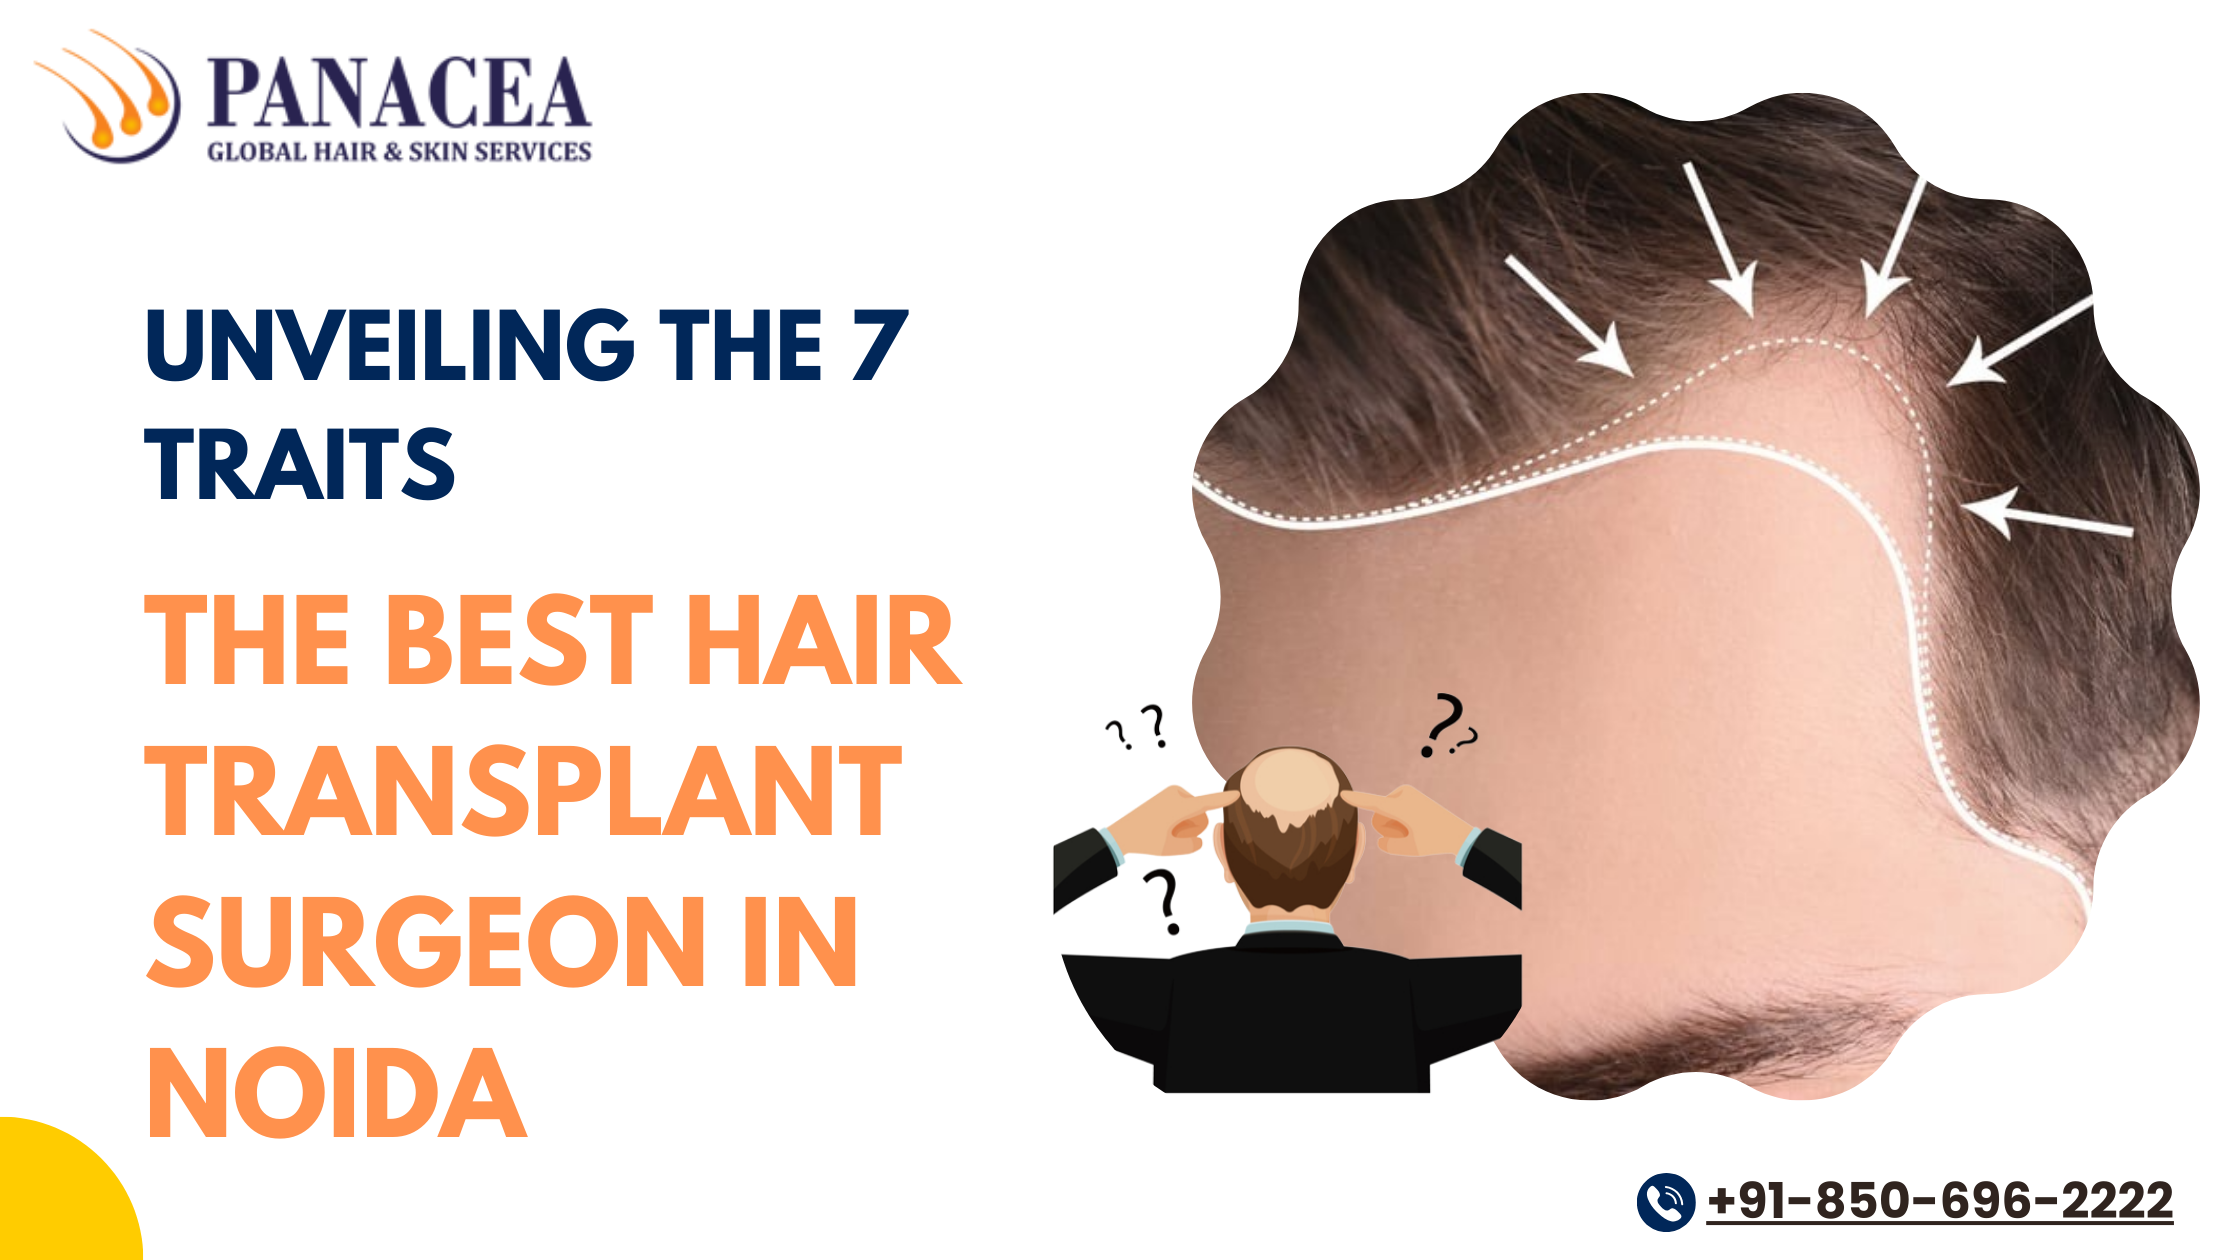 Unveiling the 7 traits Of the Best Hair Transplant Surgeon in Noida